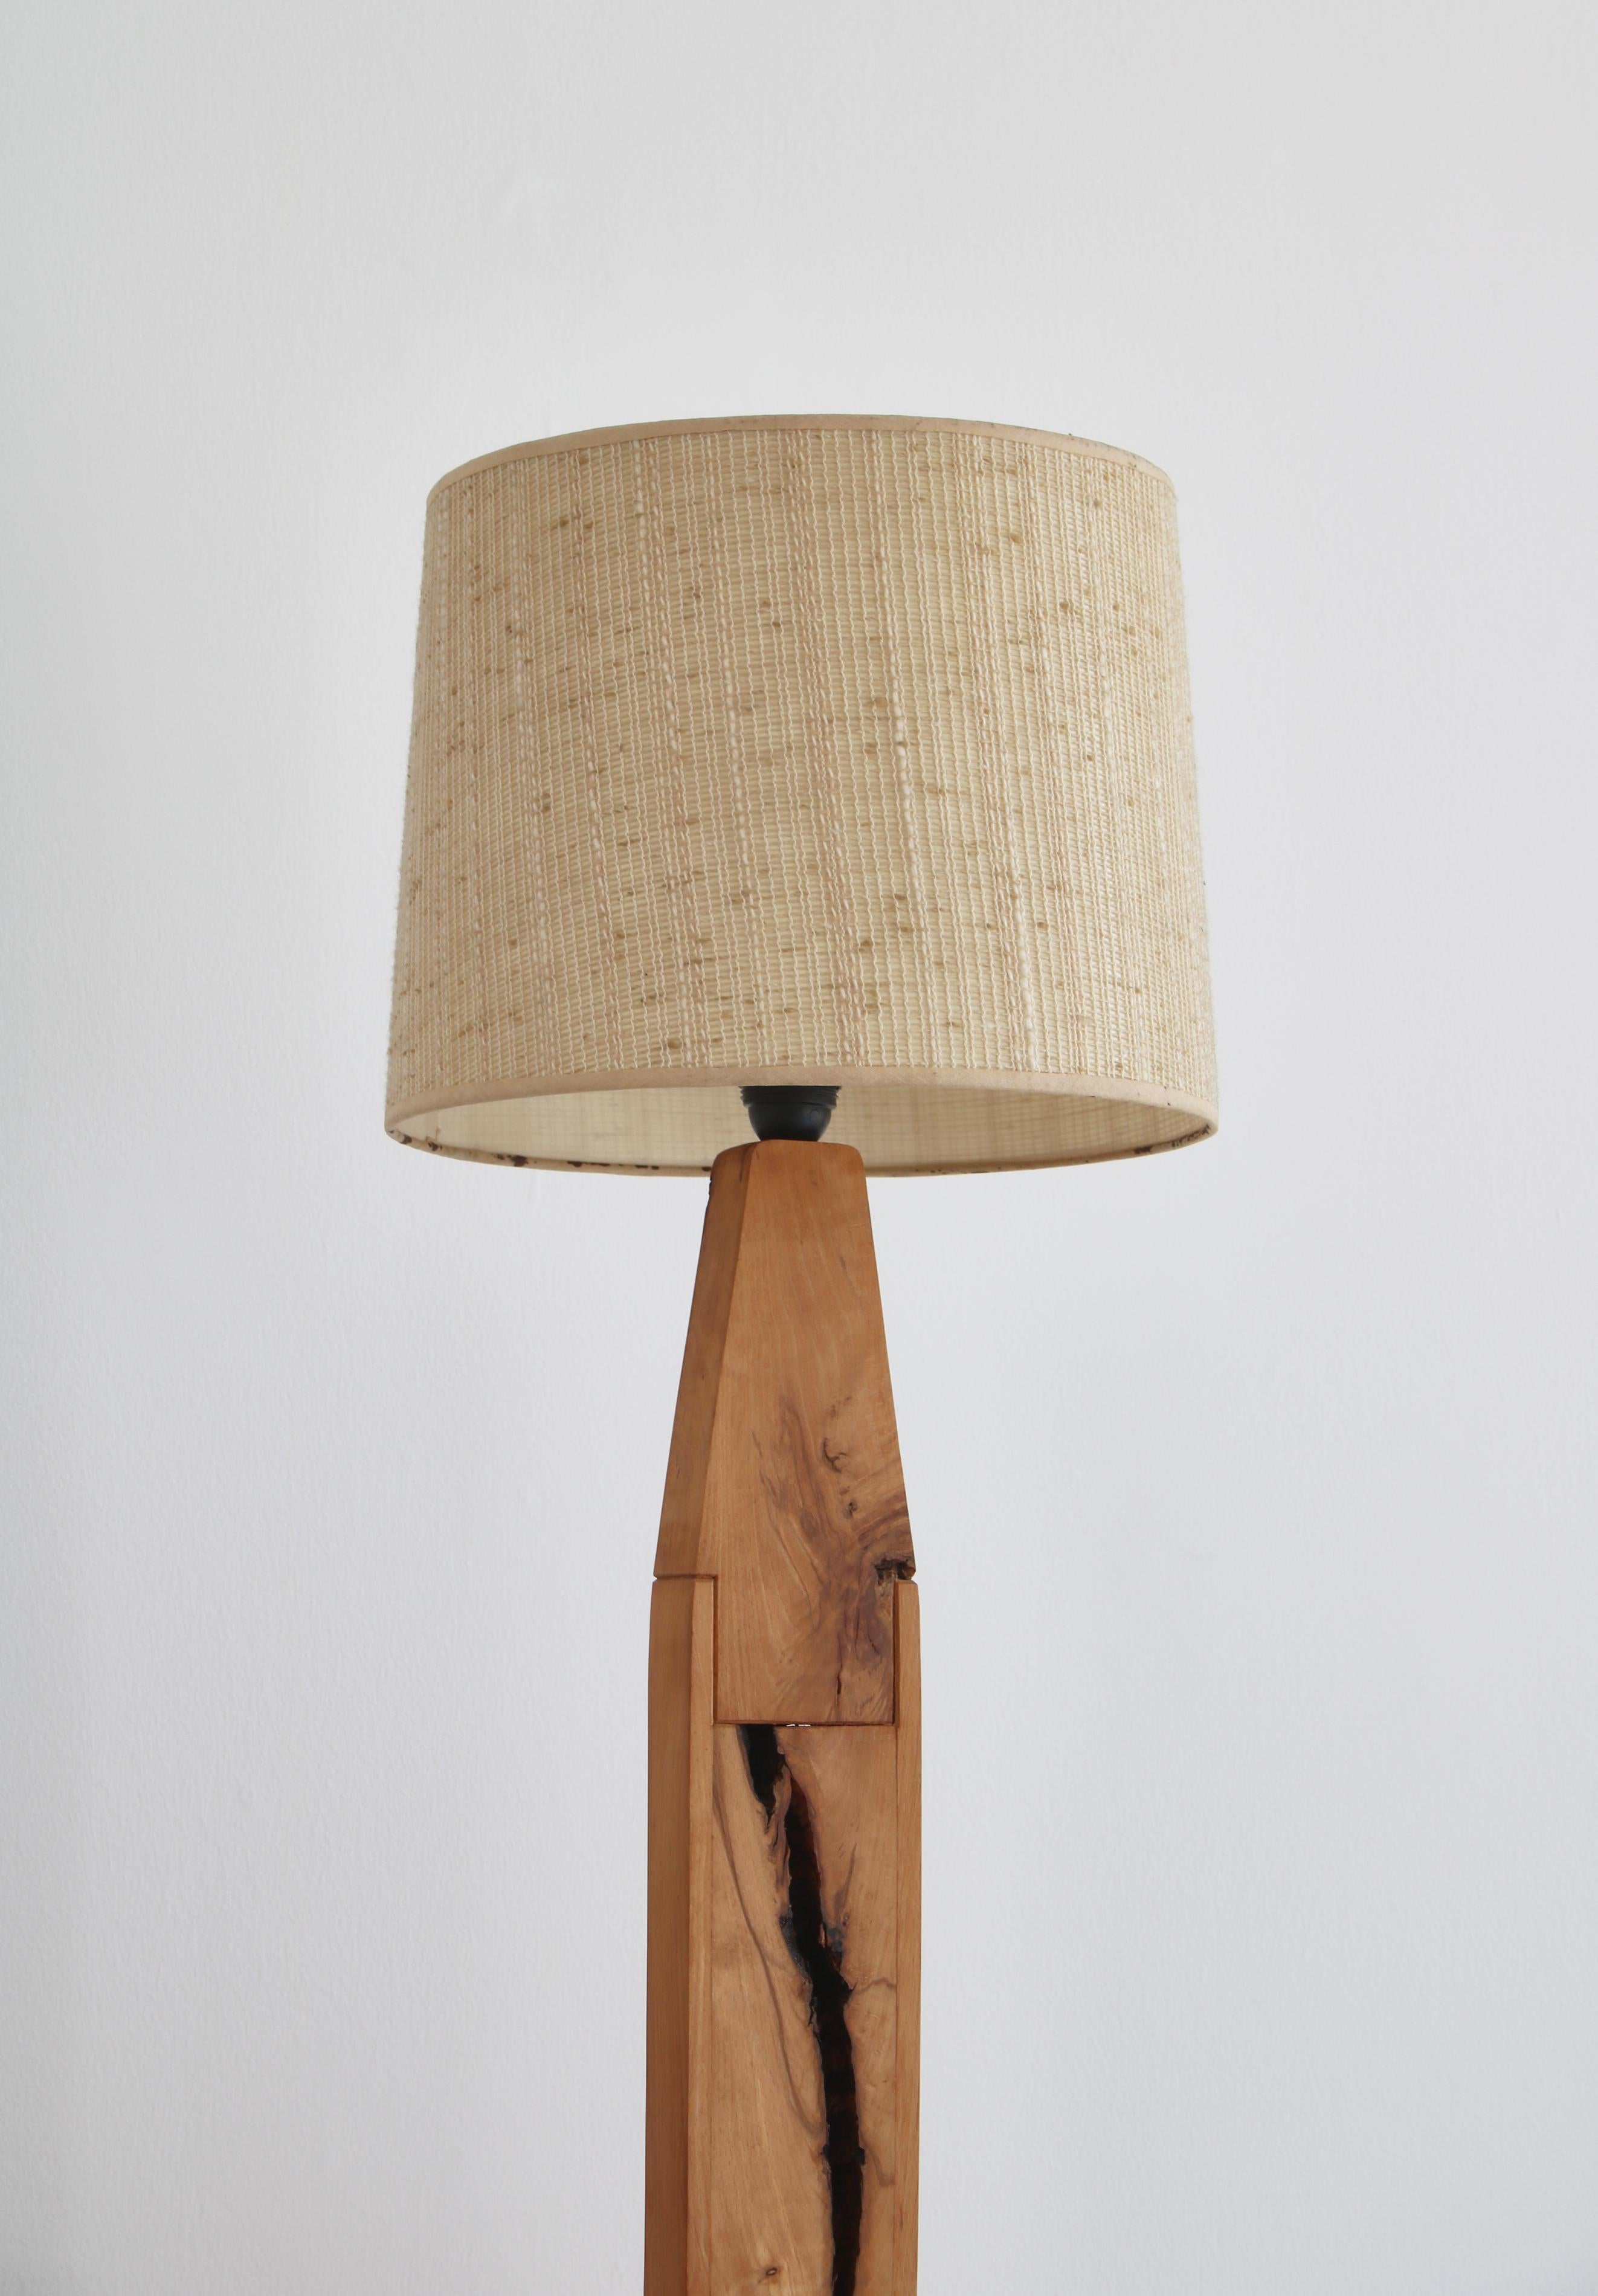 Unique Pinewood Table Lamp with Original Shade, Scandinavia, 1970s In Good Condition For Sale In Odense, DK